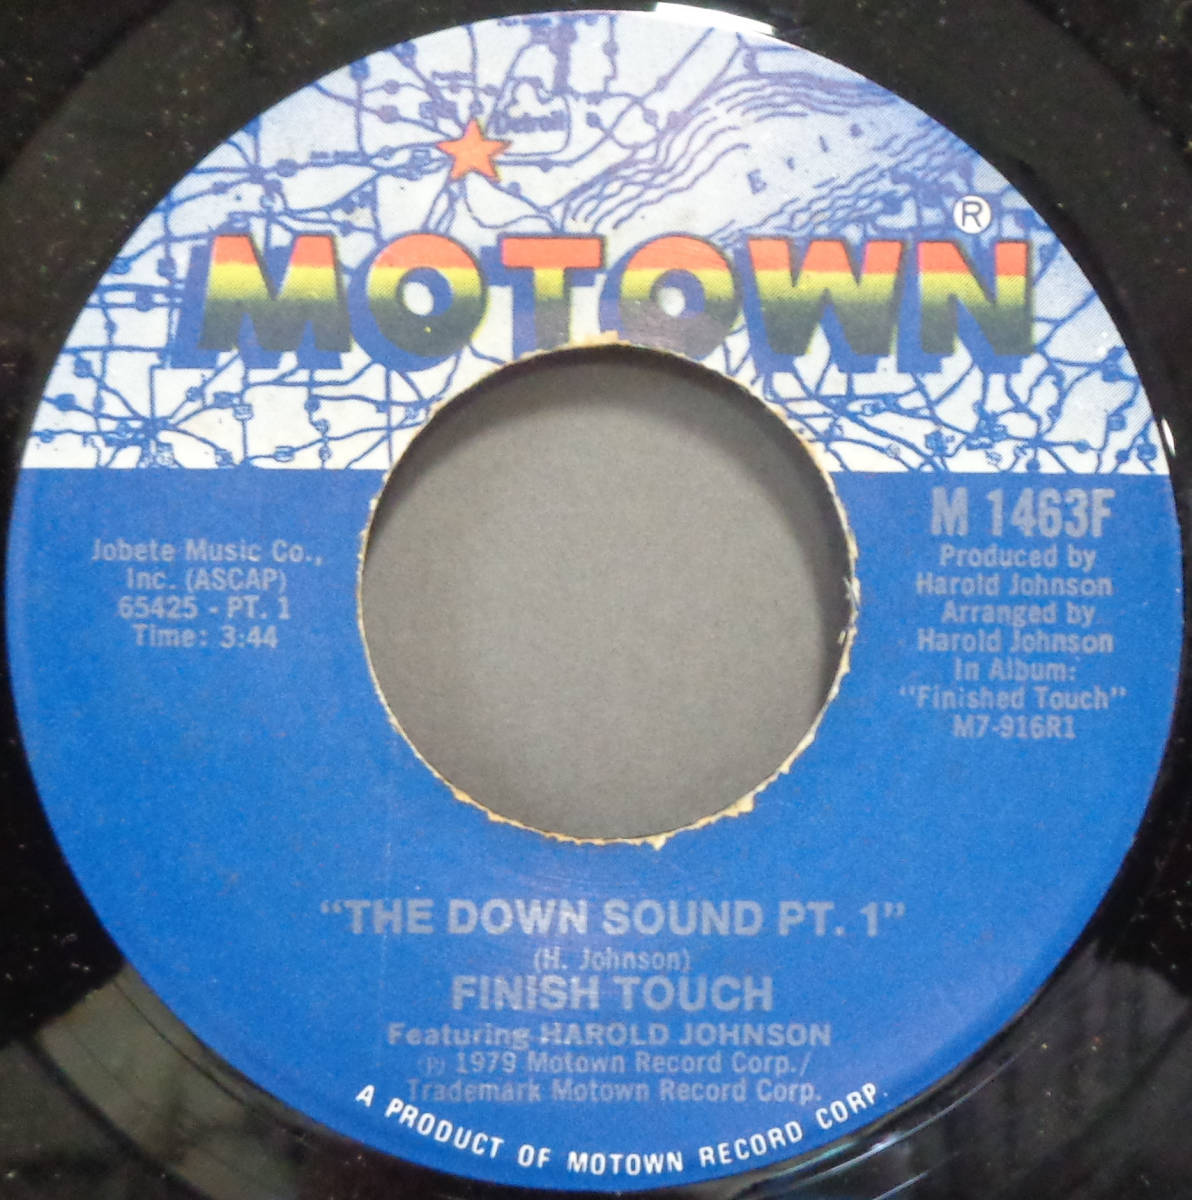 【SOUL 45】FINISH TOUCH - THE DOWN SOUND / PT.2 (s231009042)_画像1